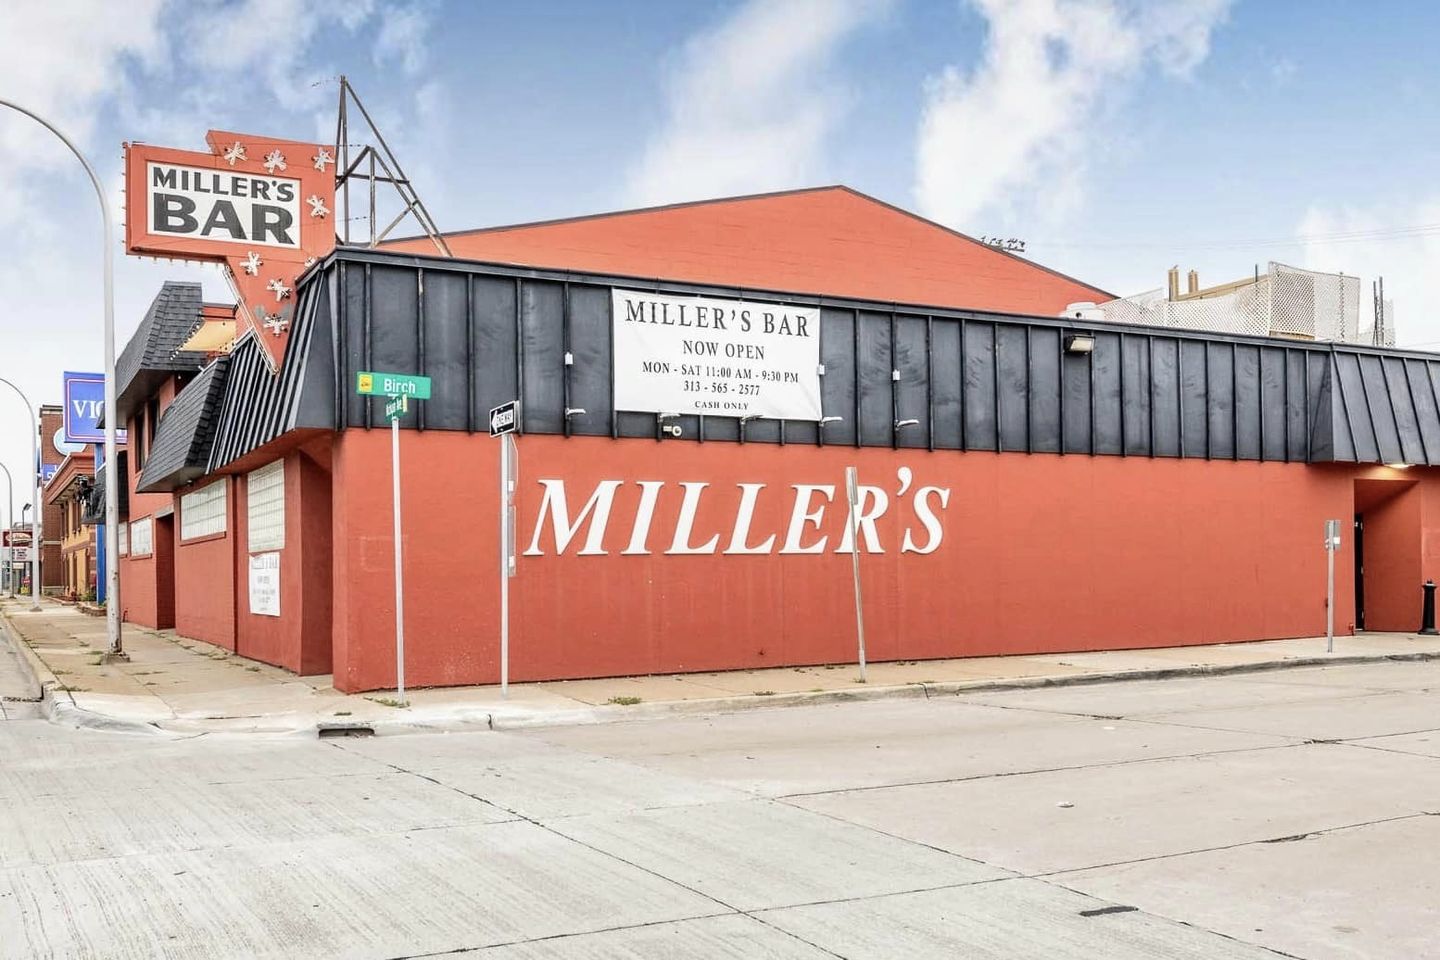 Arab American businessman buys Miller's Bar, plans to carry on 